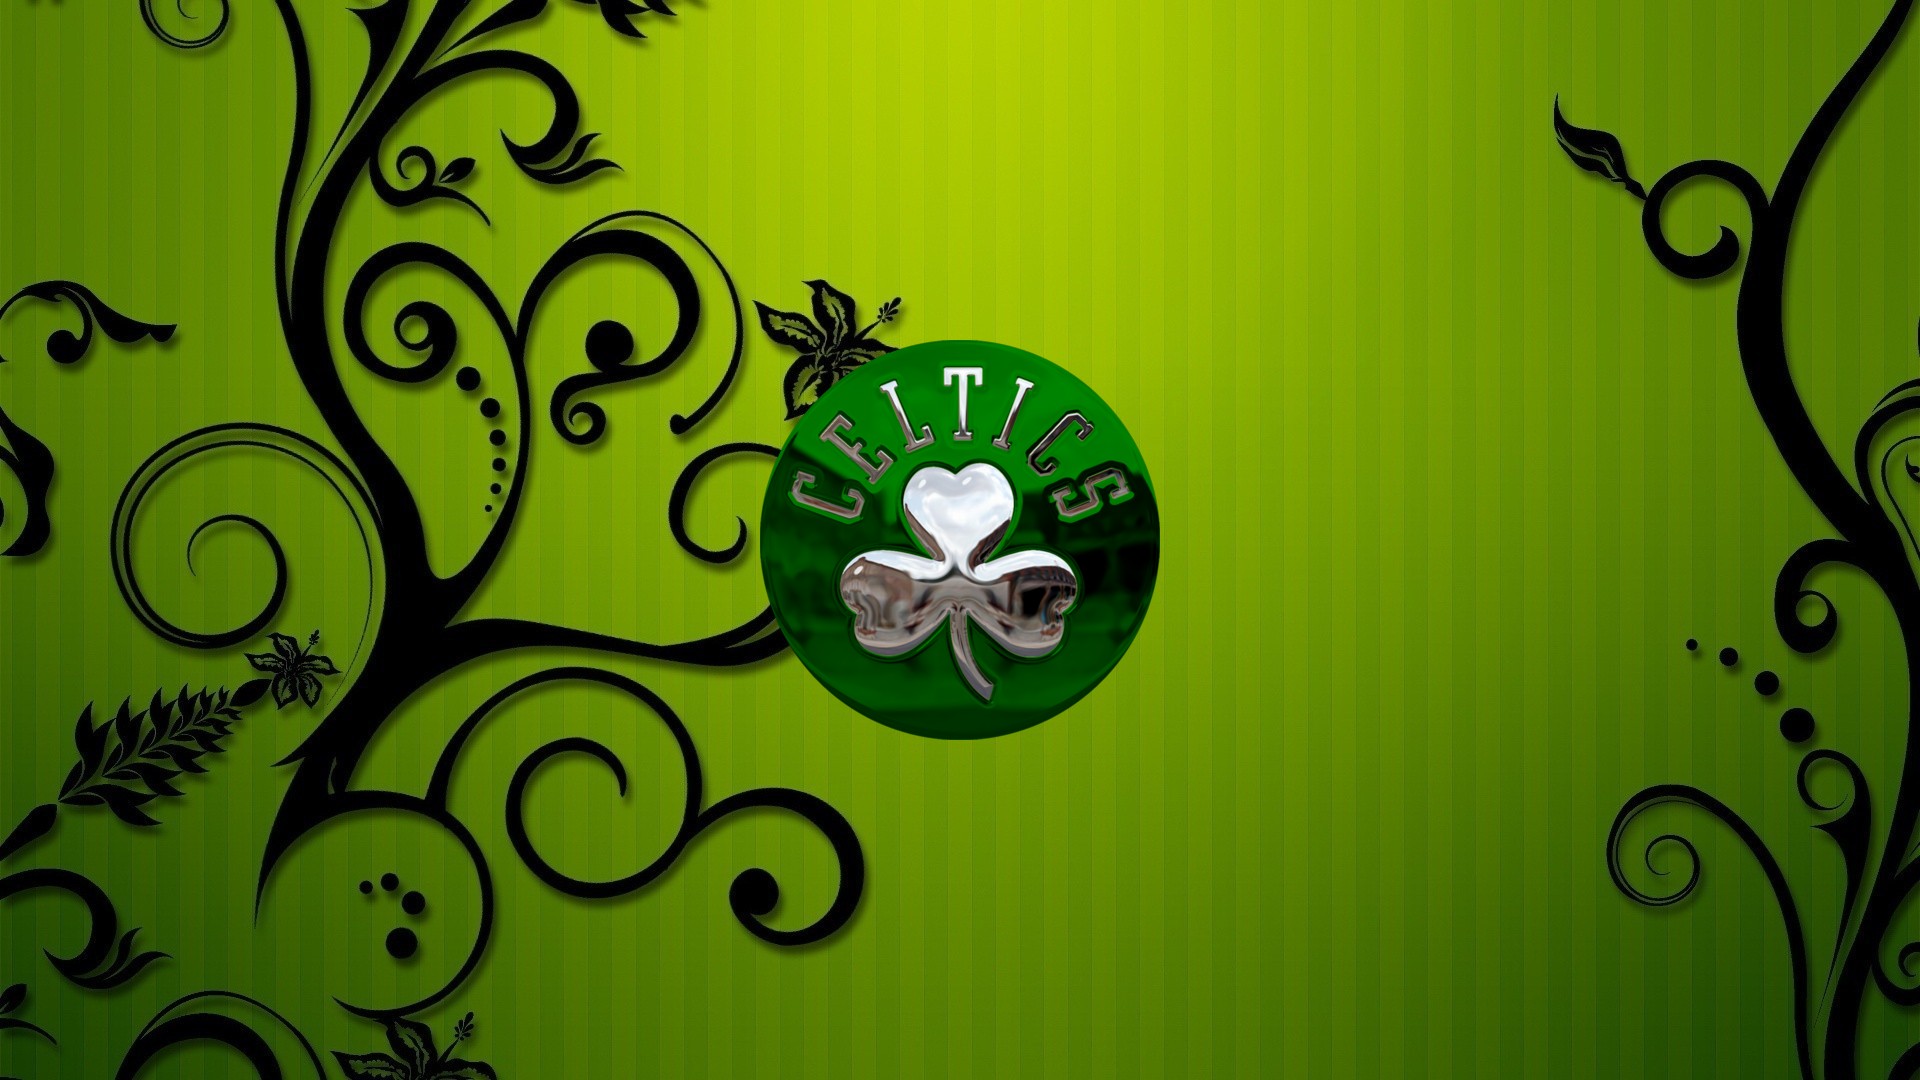 Boston Celtics For Desktop Wallpaper with image dimensions 1920x1080 pixel. You can make this wallpaper for your Desktop Computer Backgrounds, Windows or Mac Screensavers, iPhone Lock screen, Tablet or Android and another Mobile Phone device